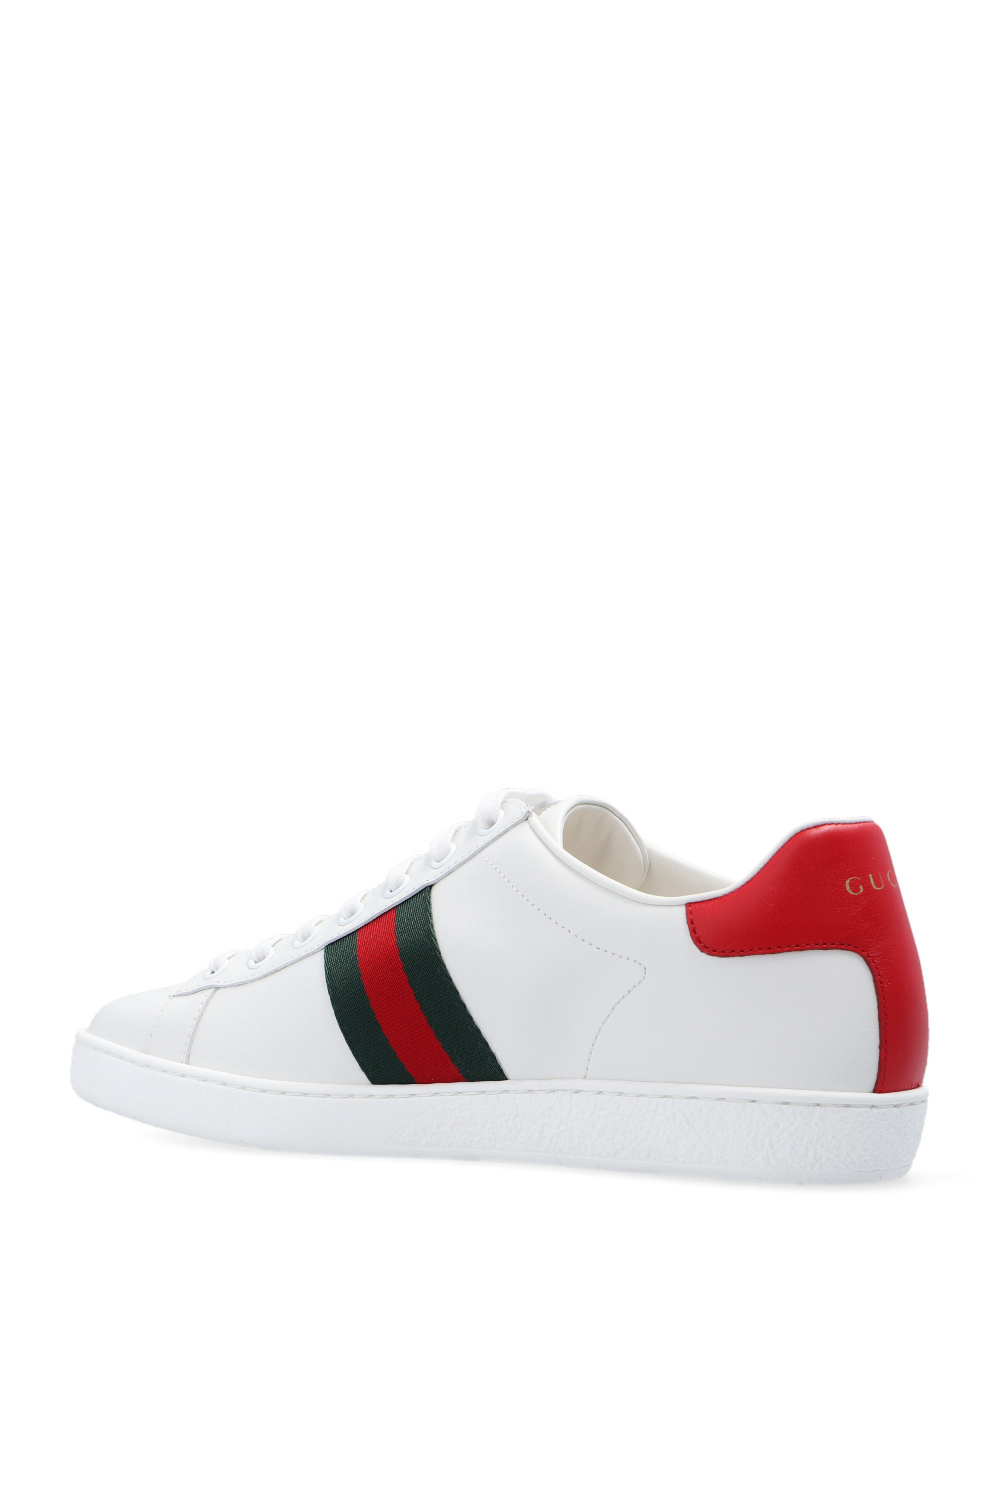 gucci white and grey interlocking ace sneakers 599147 ayo - Sneakers from the 'Gucci Tiger' velvet Gucci - IetpShops Germany